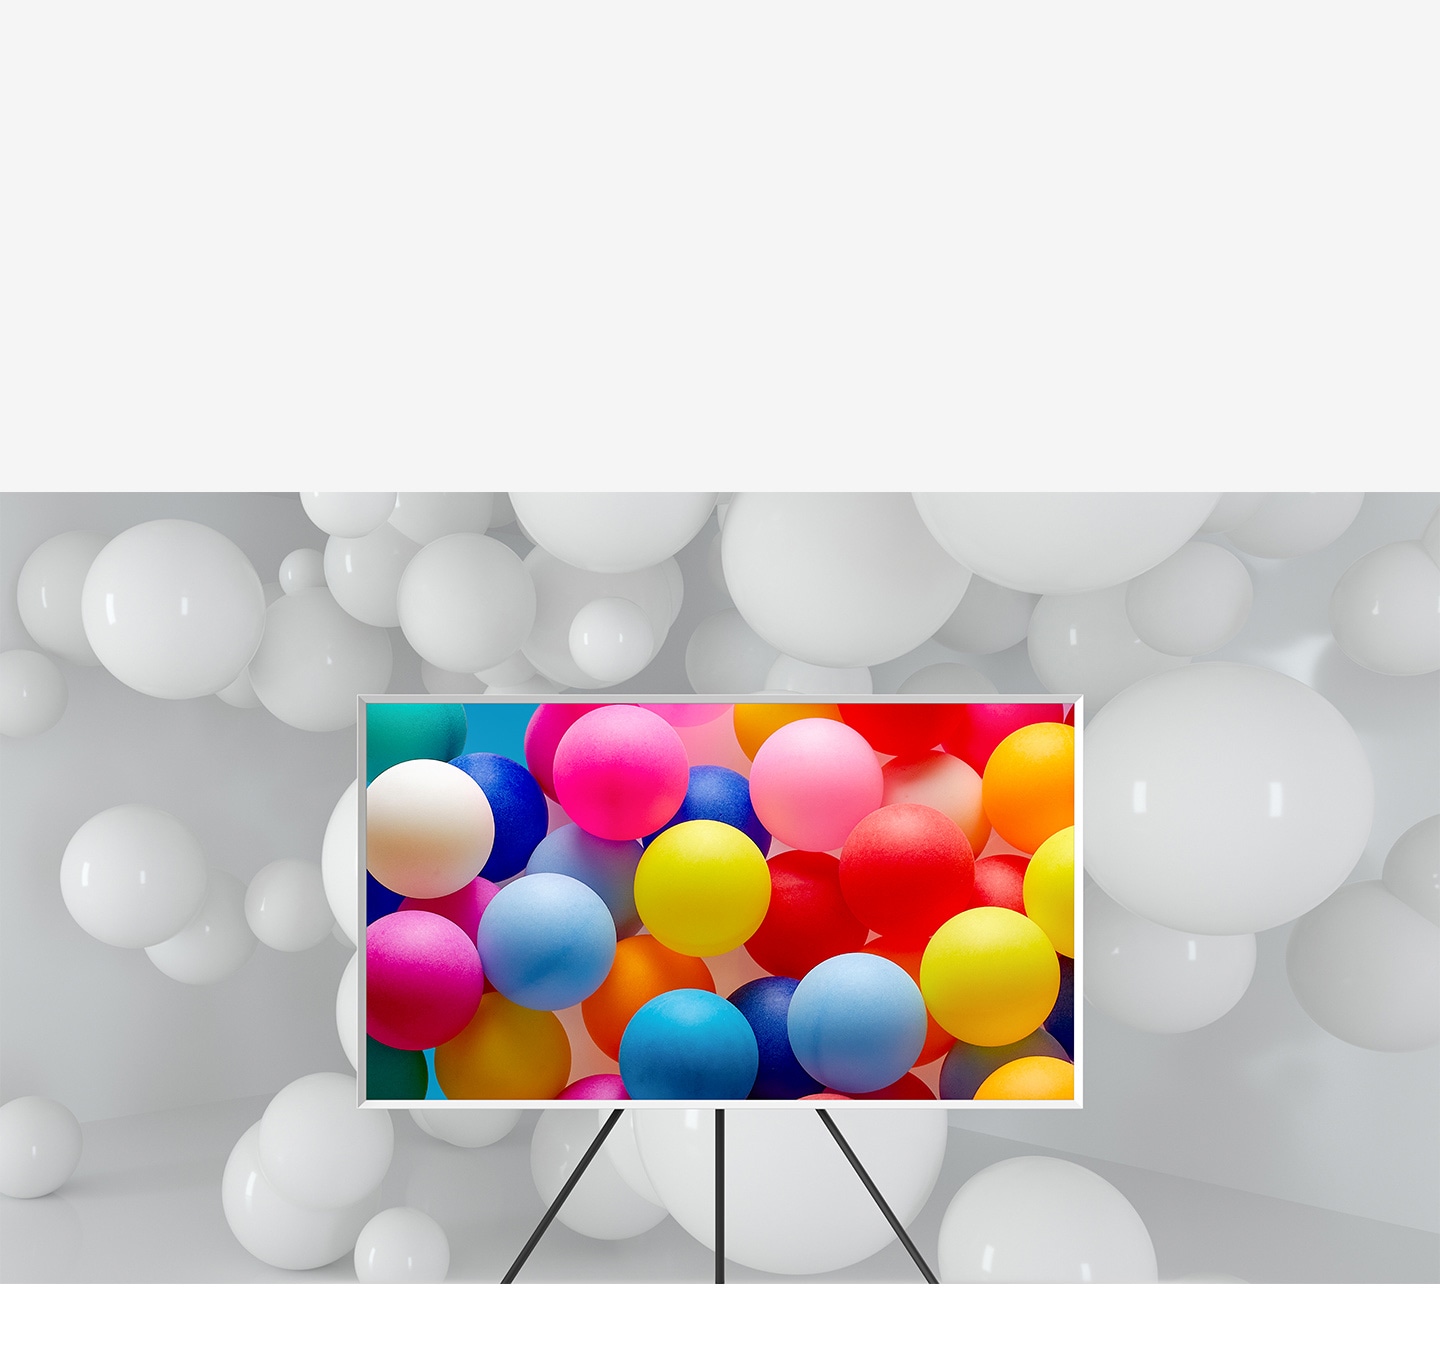 The Frame which is on Studio Stand is in a room full of white balloons. Only the balloons on the screen are visible in various vivid colours.